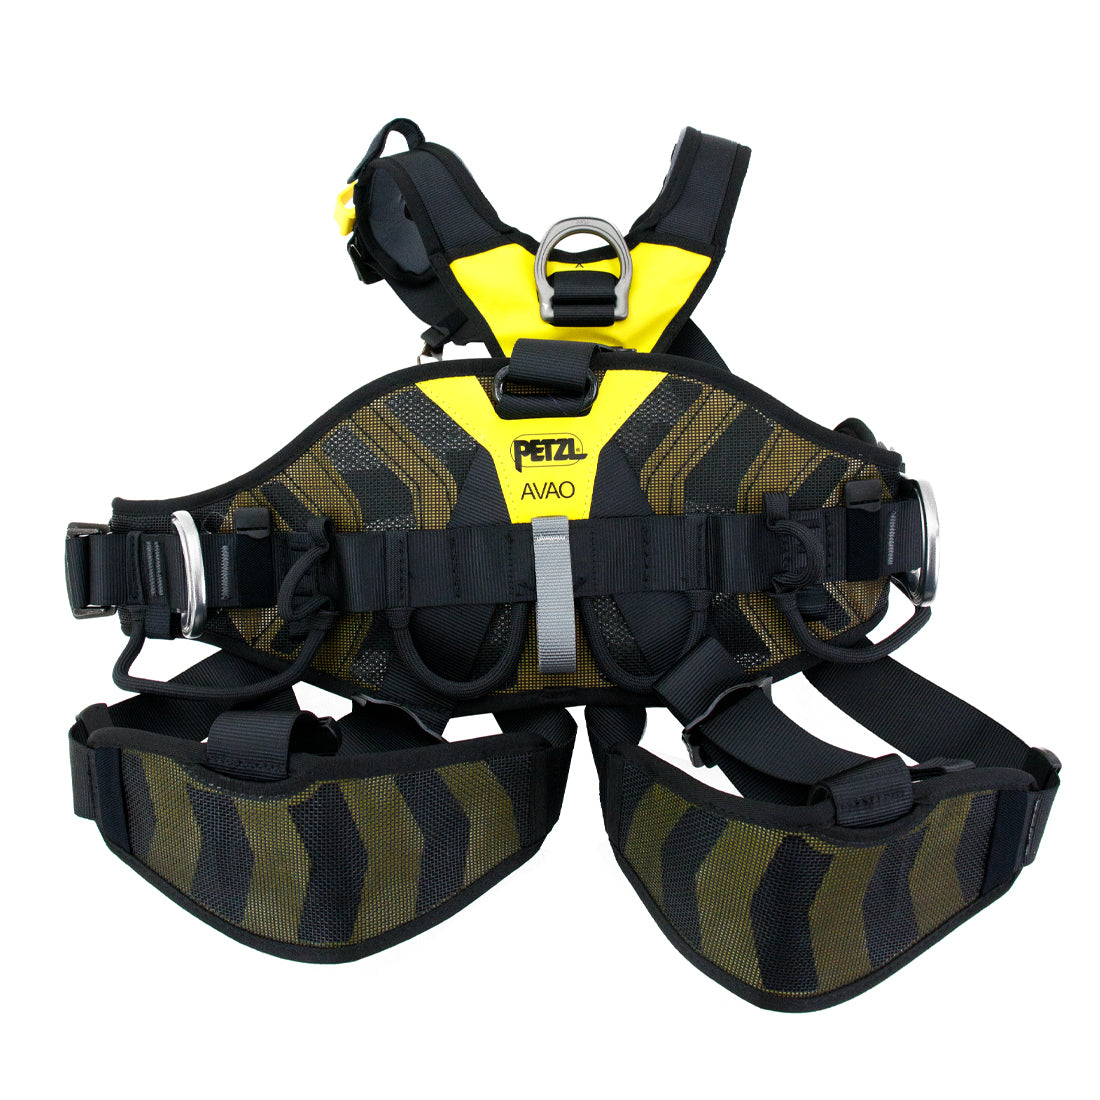 Petzl AVAO Harness - Small Front View